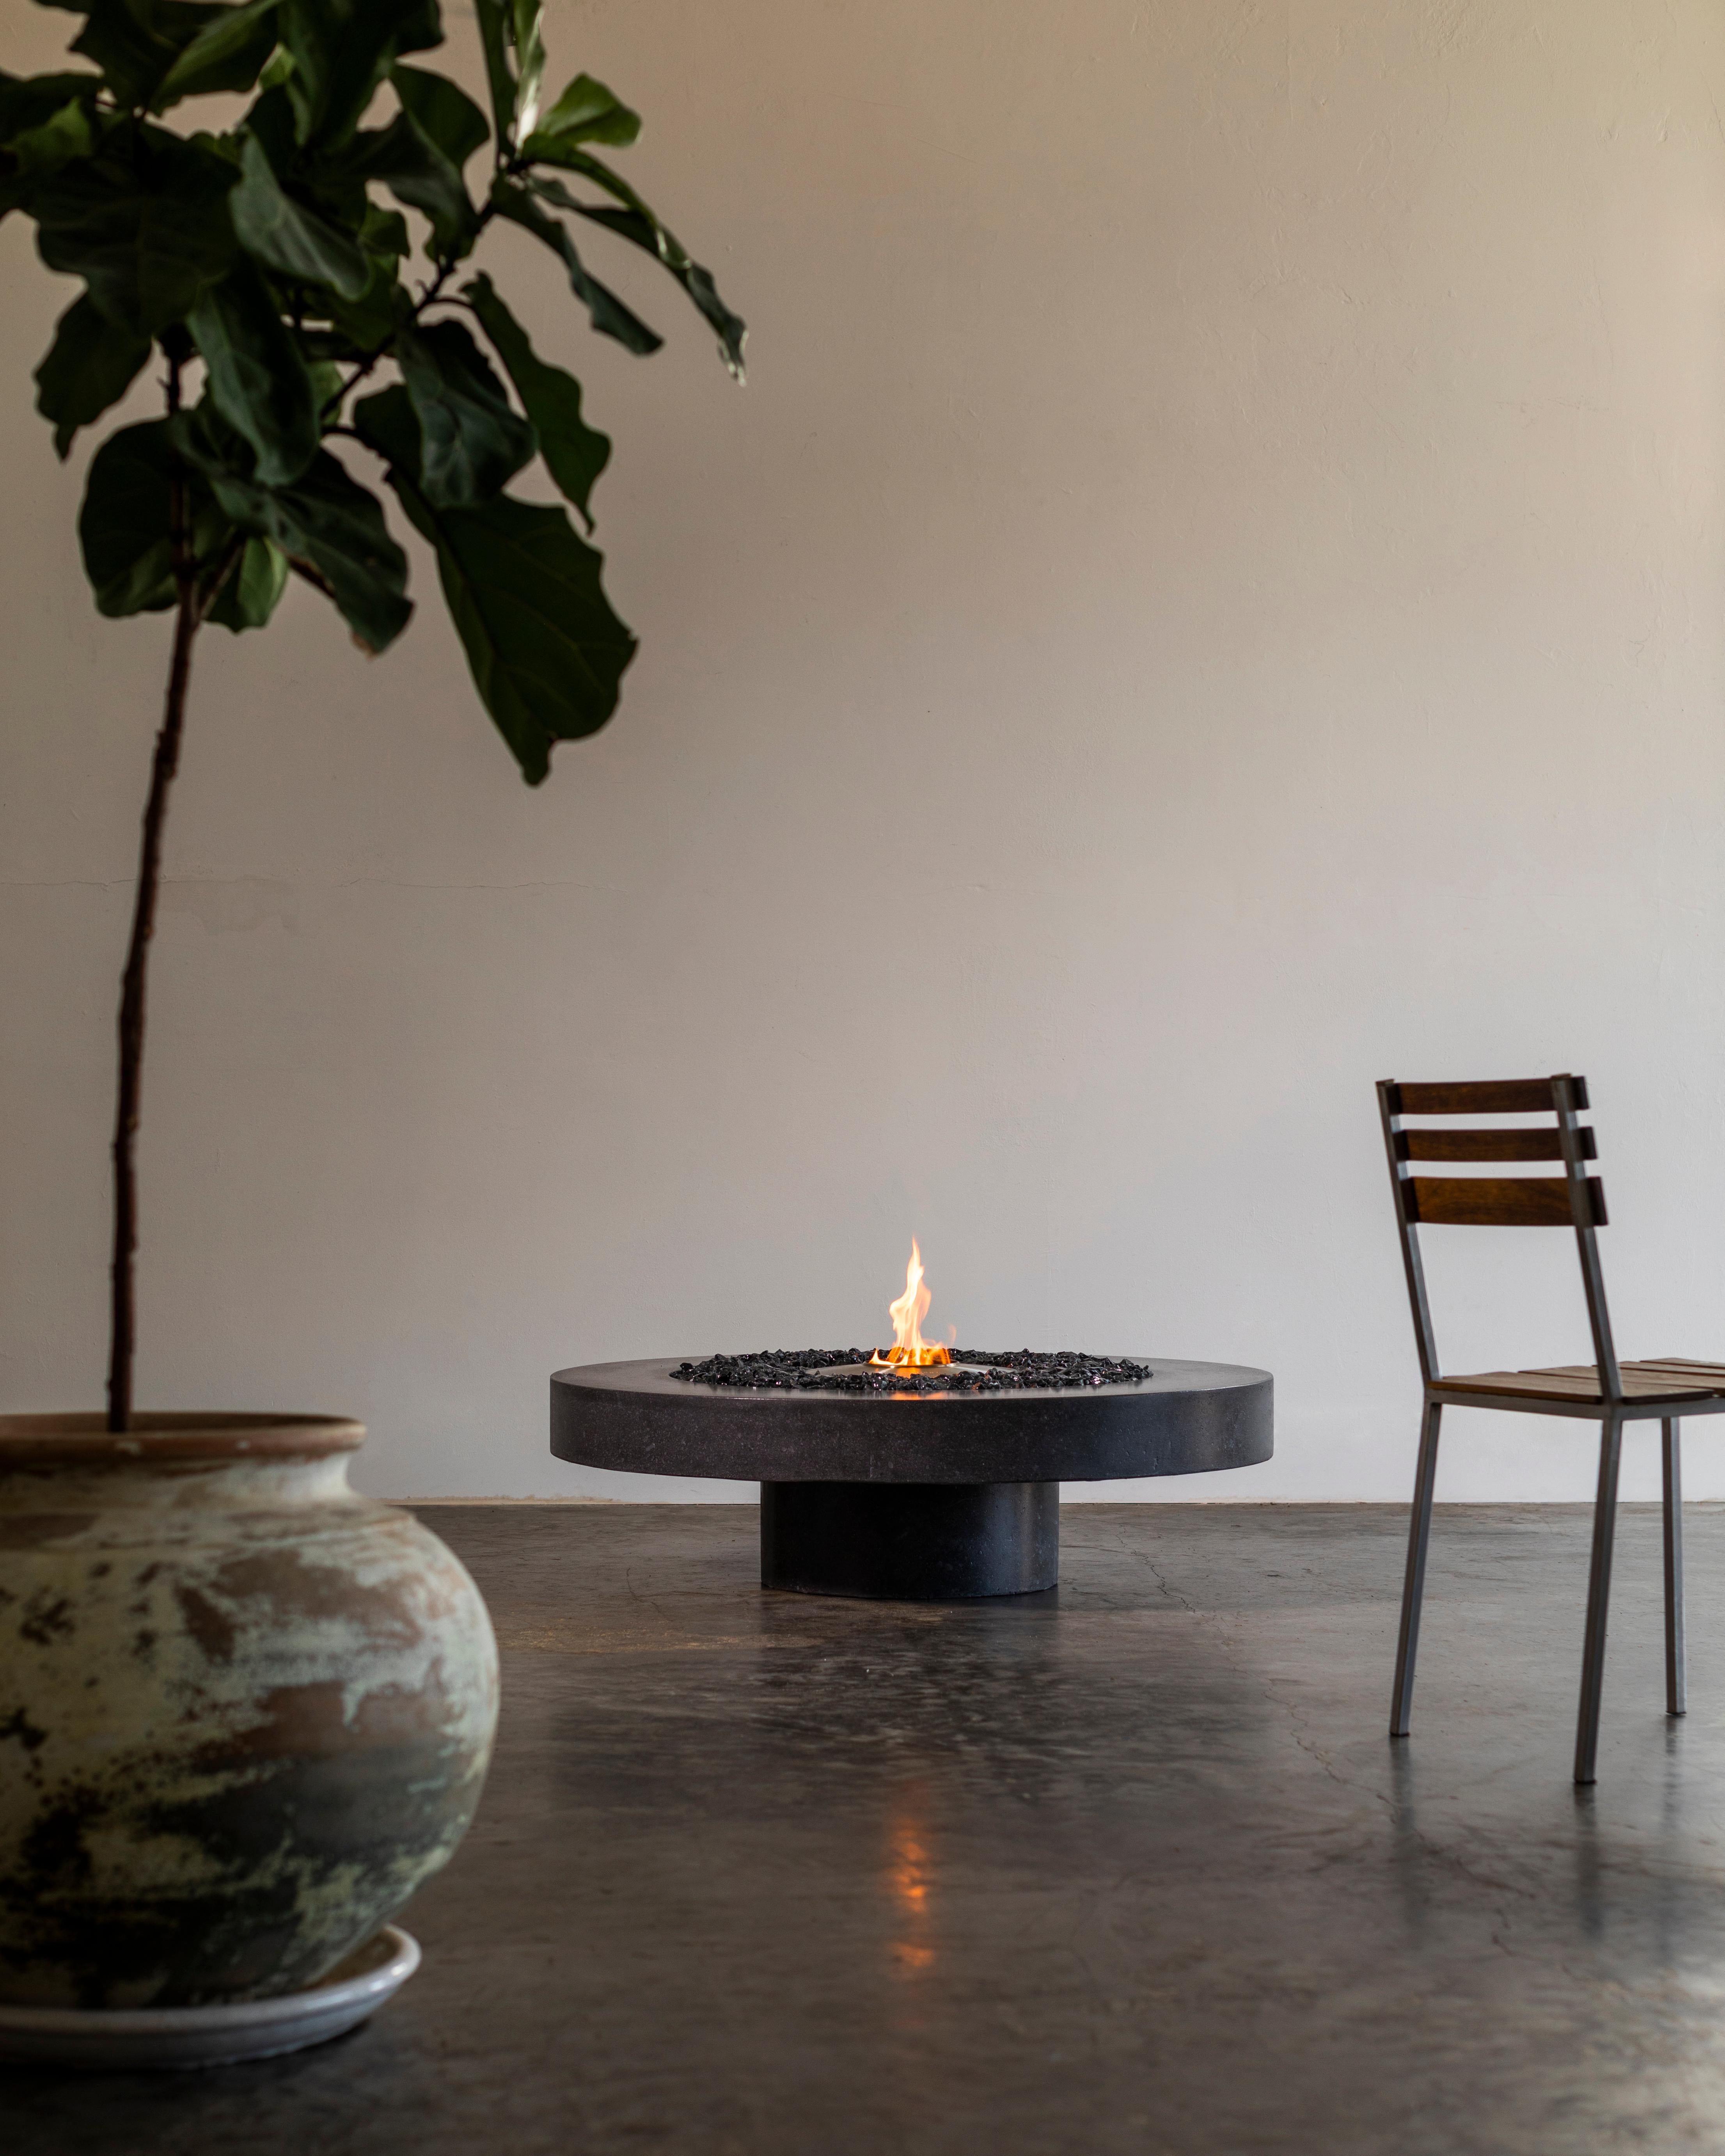 James de Wulf's Floating Concrete Fire Table is the first in a series of three designs. Distinctive single pedestal design creates the illusion of a floating concrete disc from seated guests and standing angles. Table is polished and sealed for a